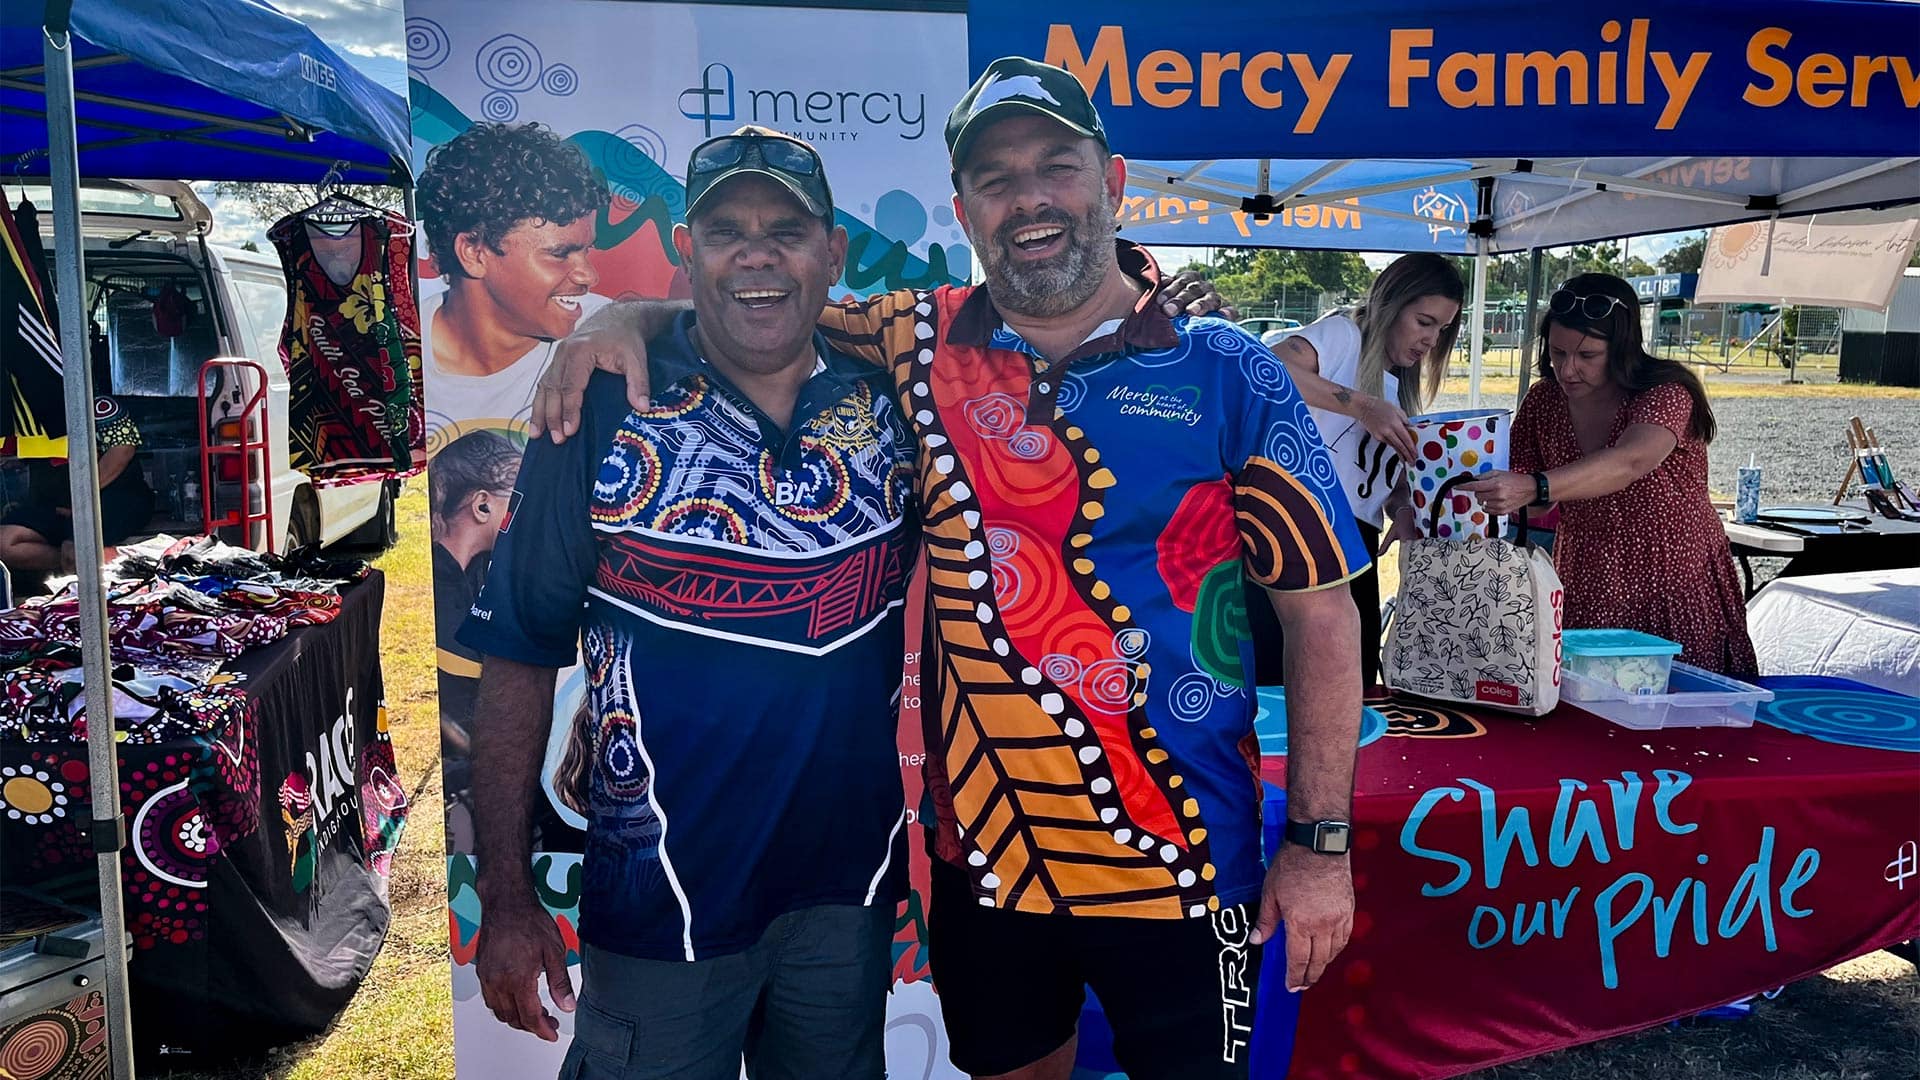 Mercy Community's Aboriginal and Torres Strait Islander Regional Cultural Lead, Laurie Stewart, and General Manager First Nations, Barry Lenihan stand with their arms around each other's shoulders smiling at the camera.